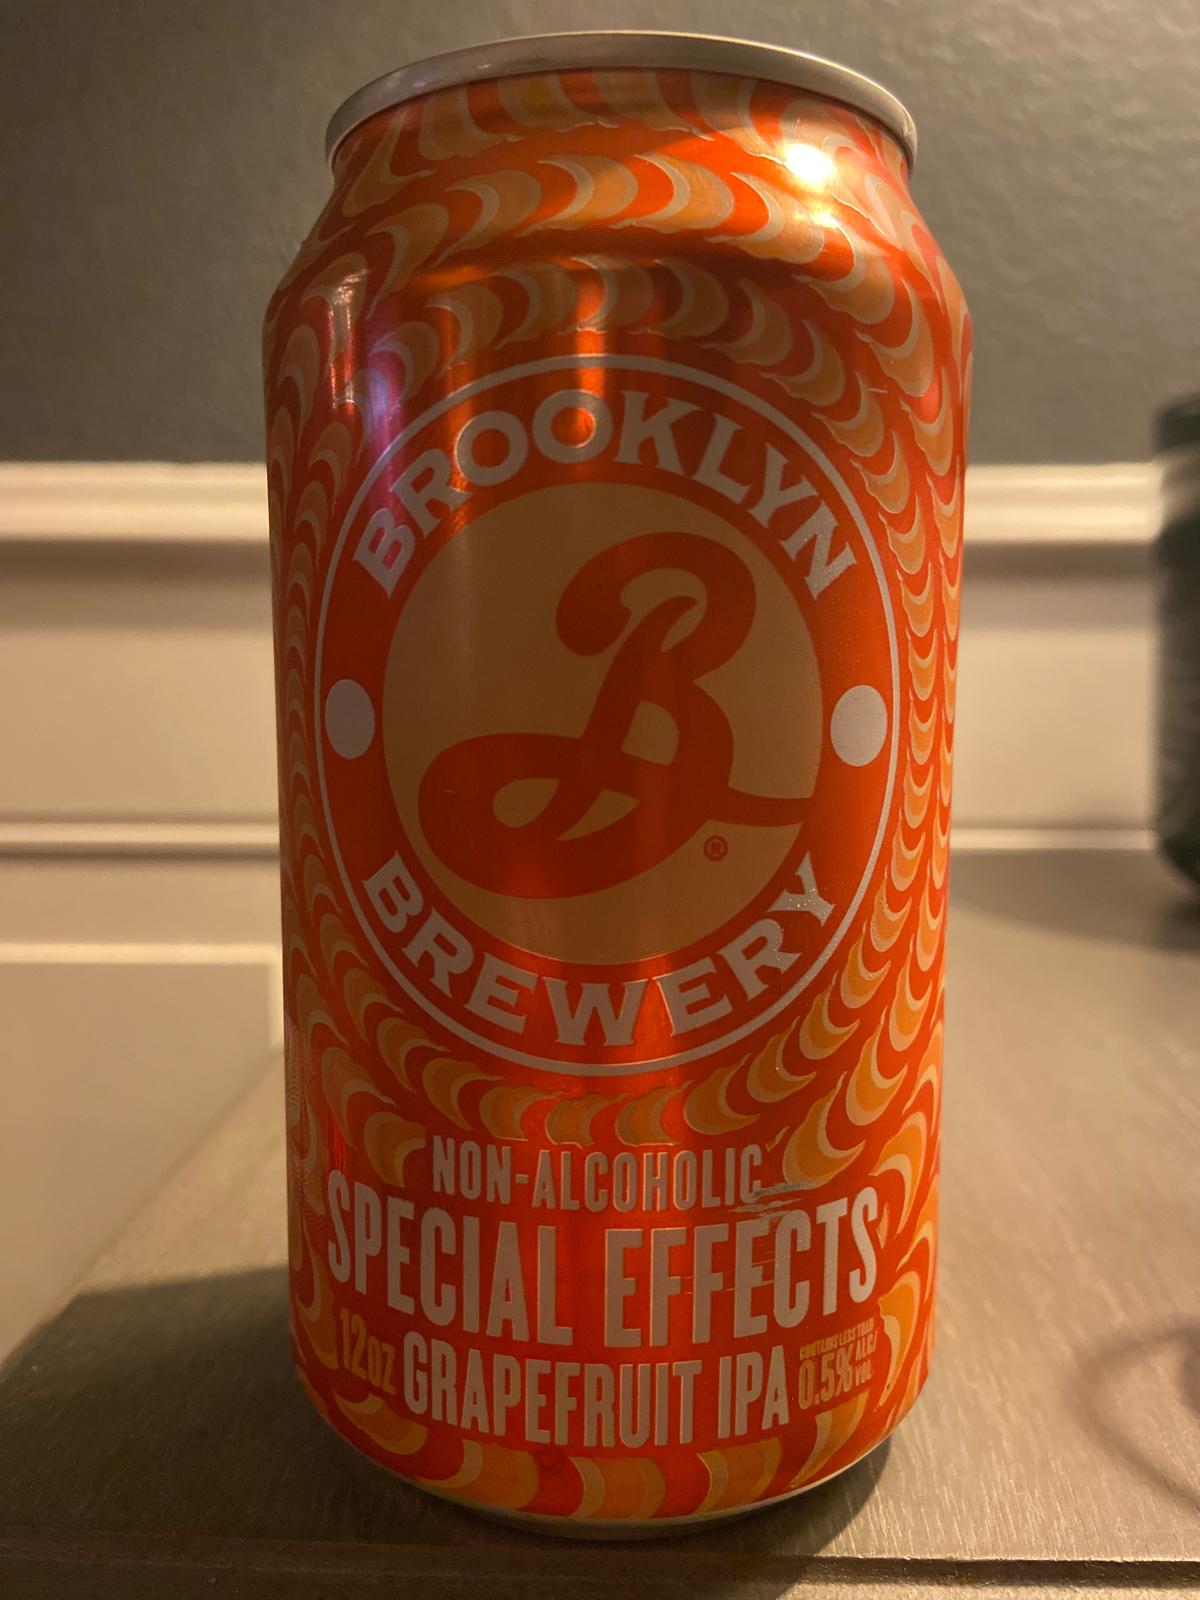 Special Effects - Grapefruit IPA